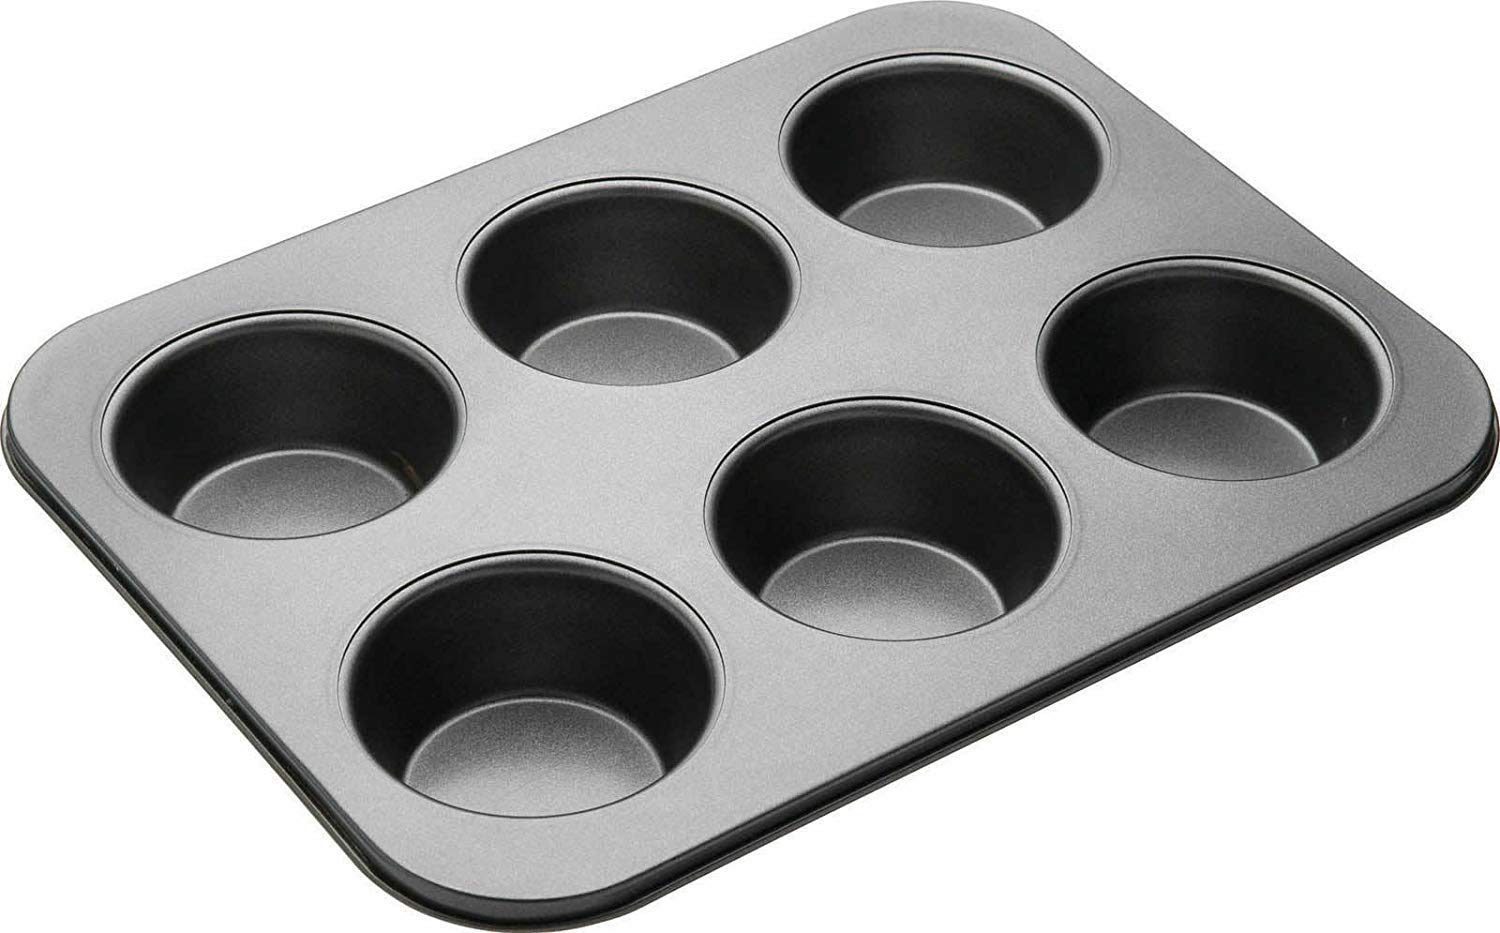 Perfect Pricee Metal 6 Slot Muffin Tray ( 1pc)